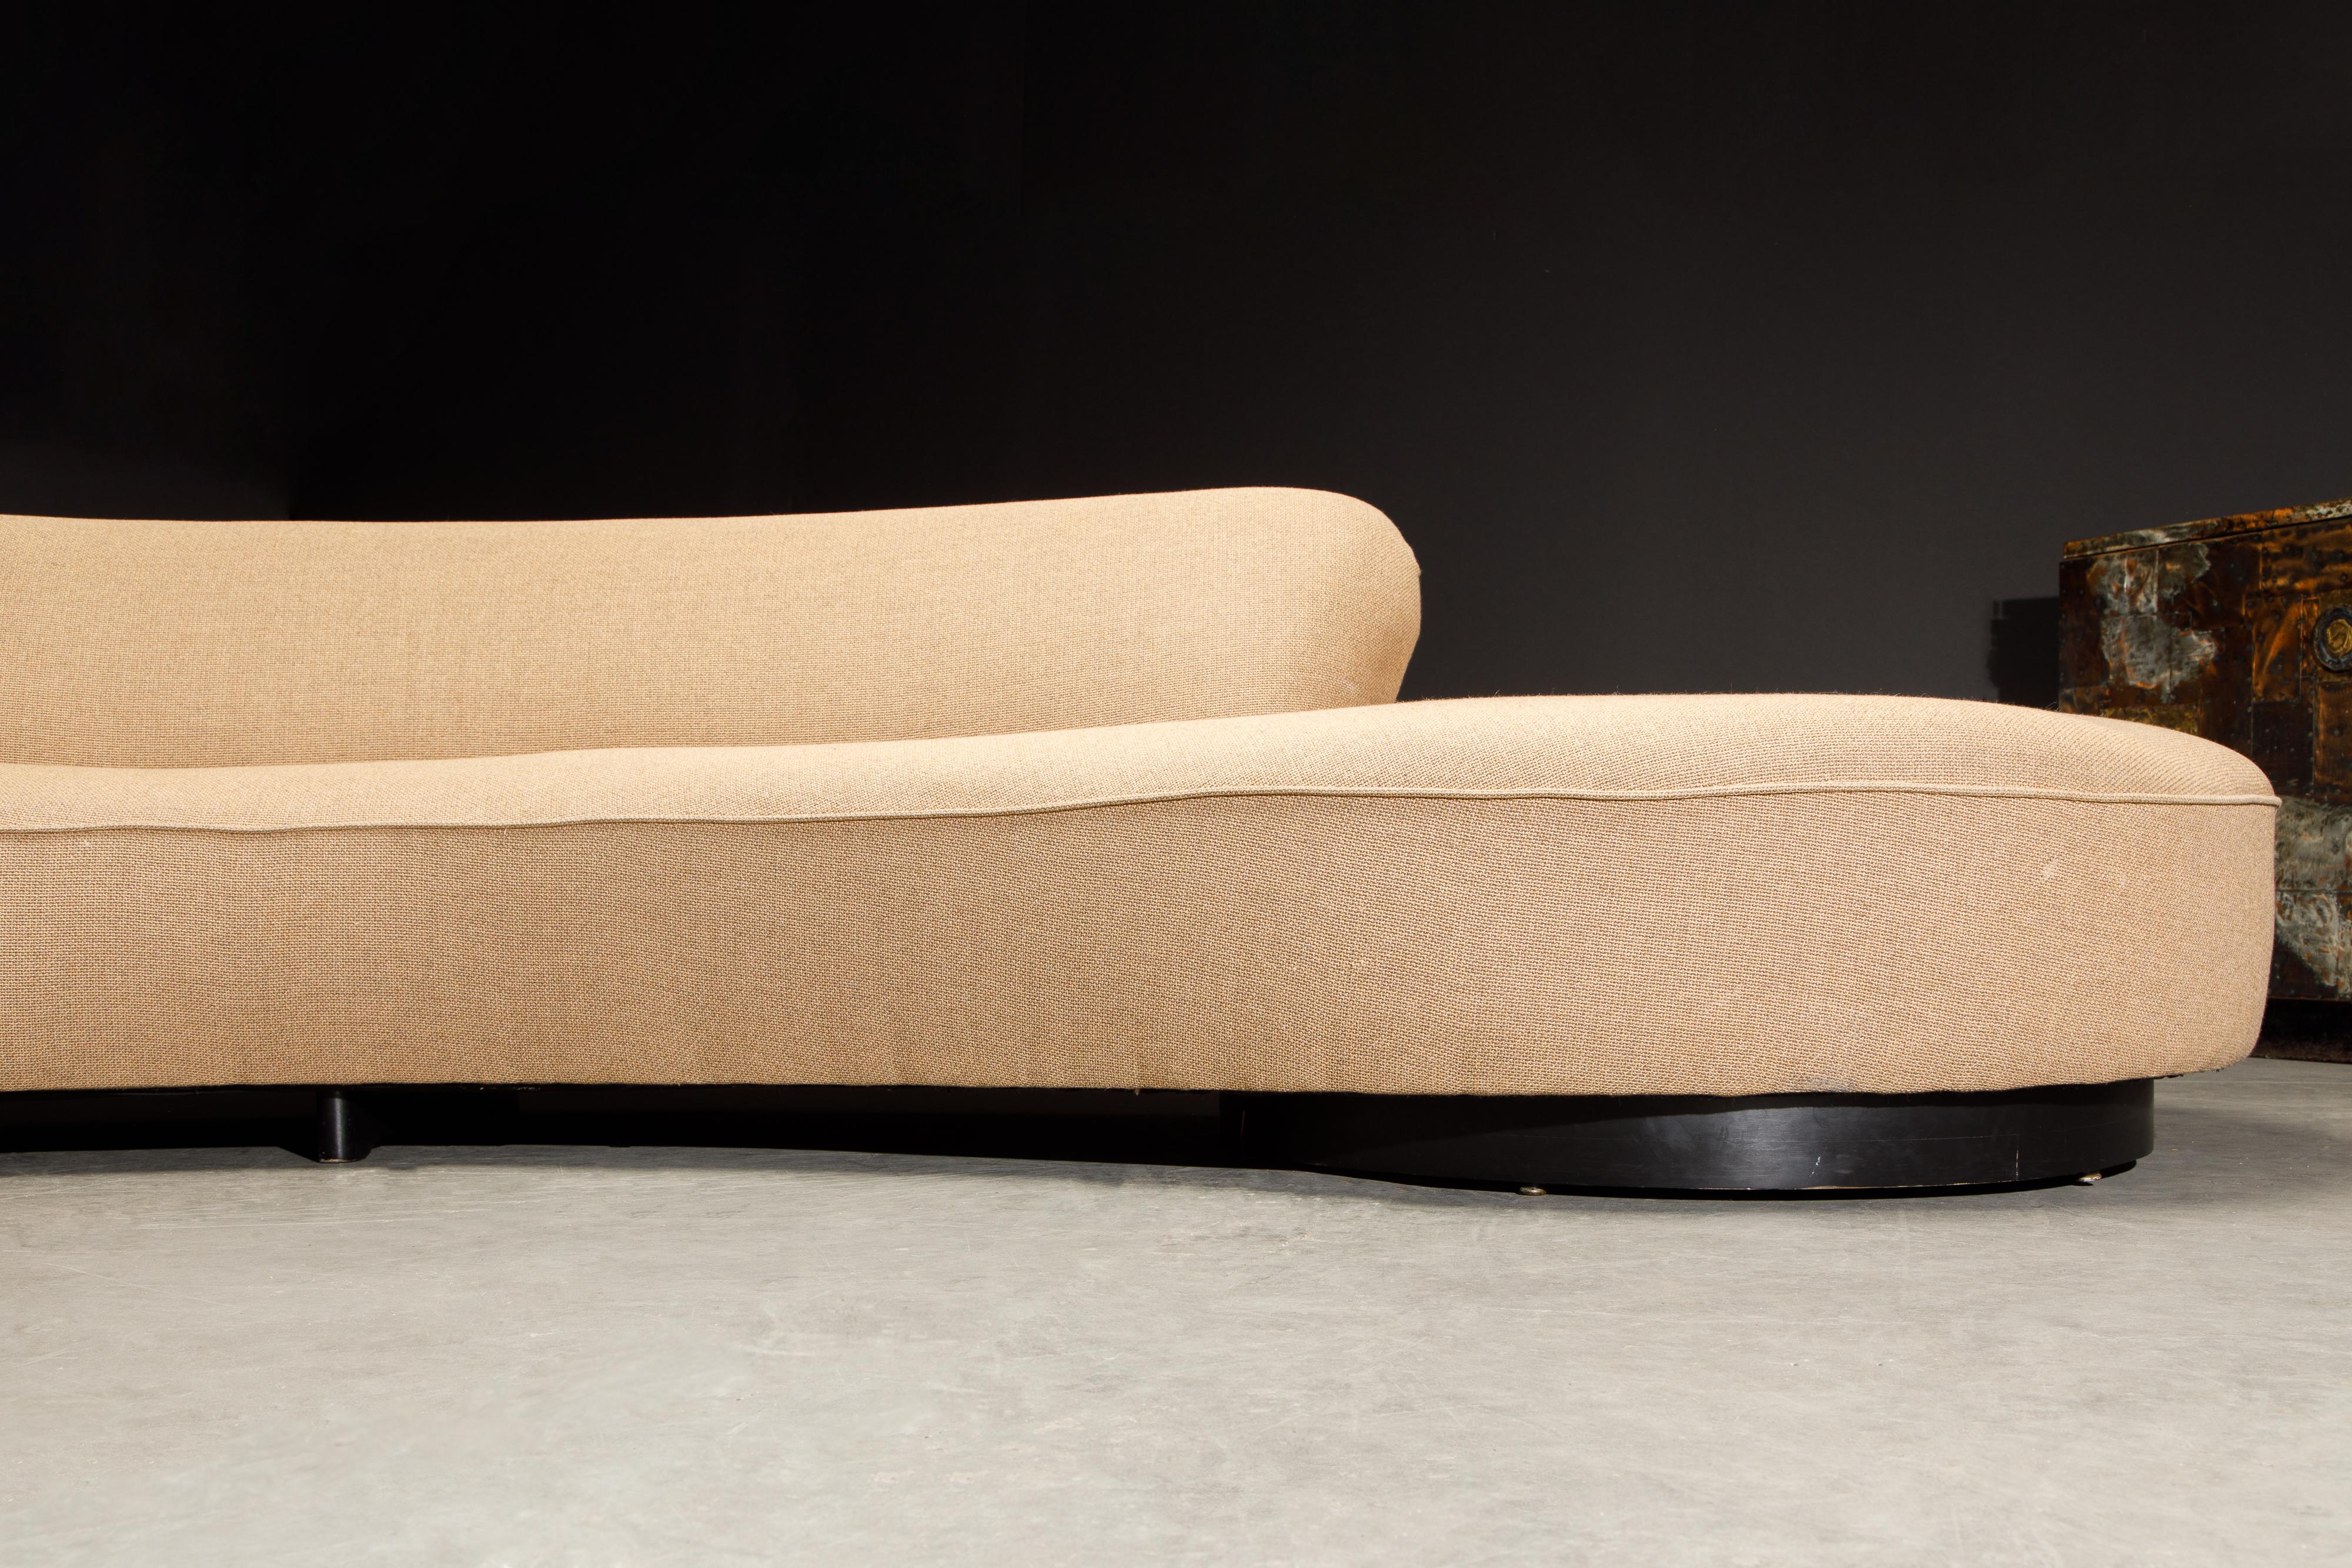 Early 'Serpentine' Sofa by Vladimir Kagan, circa 1960, Signed and Registered  6